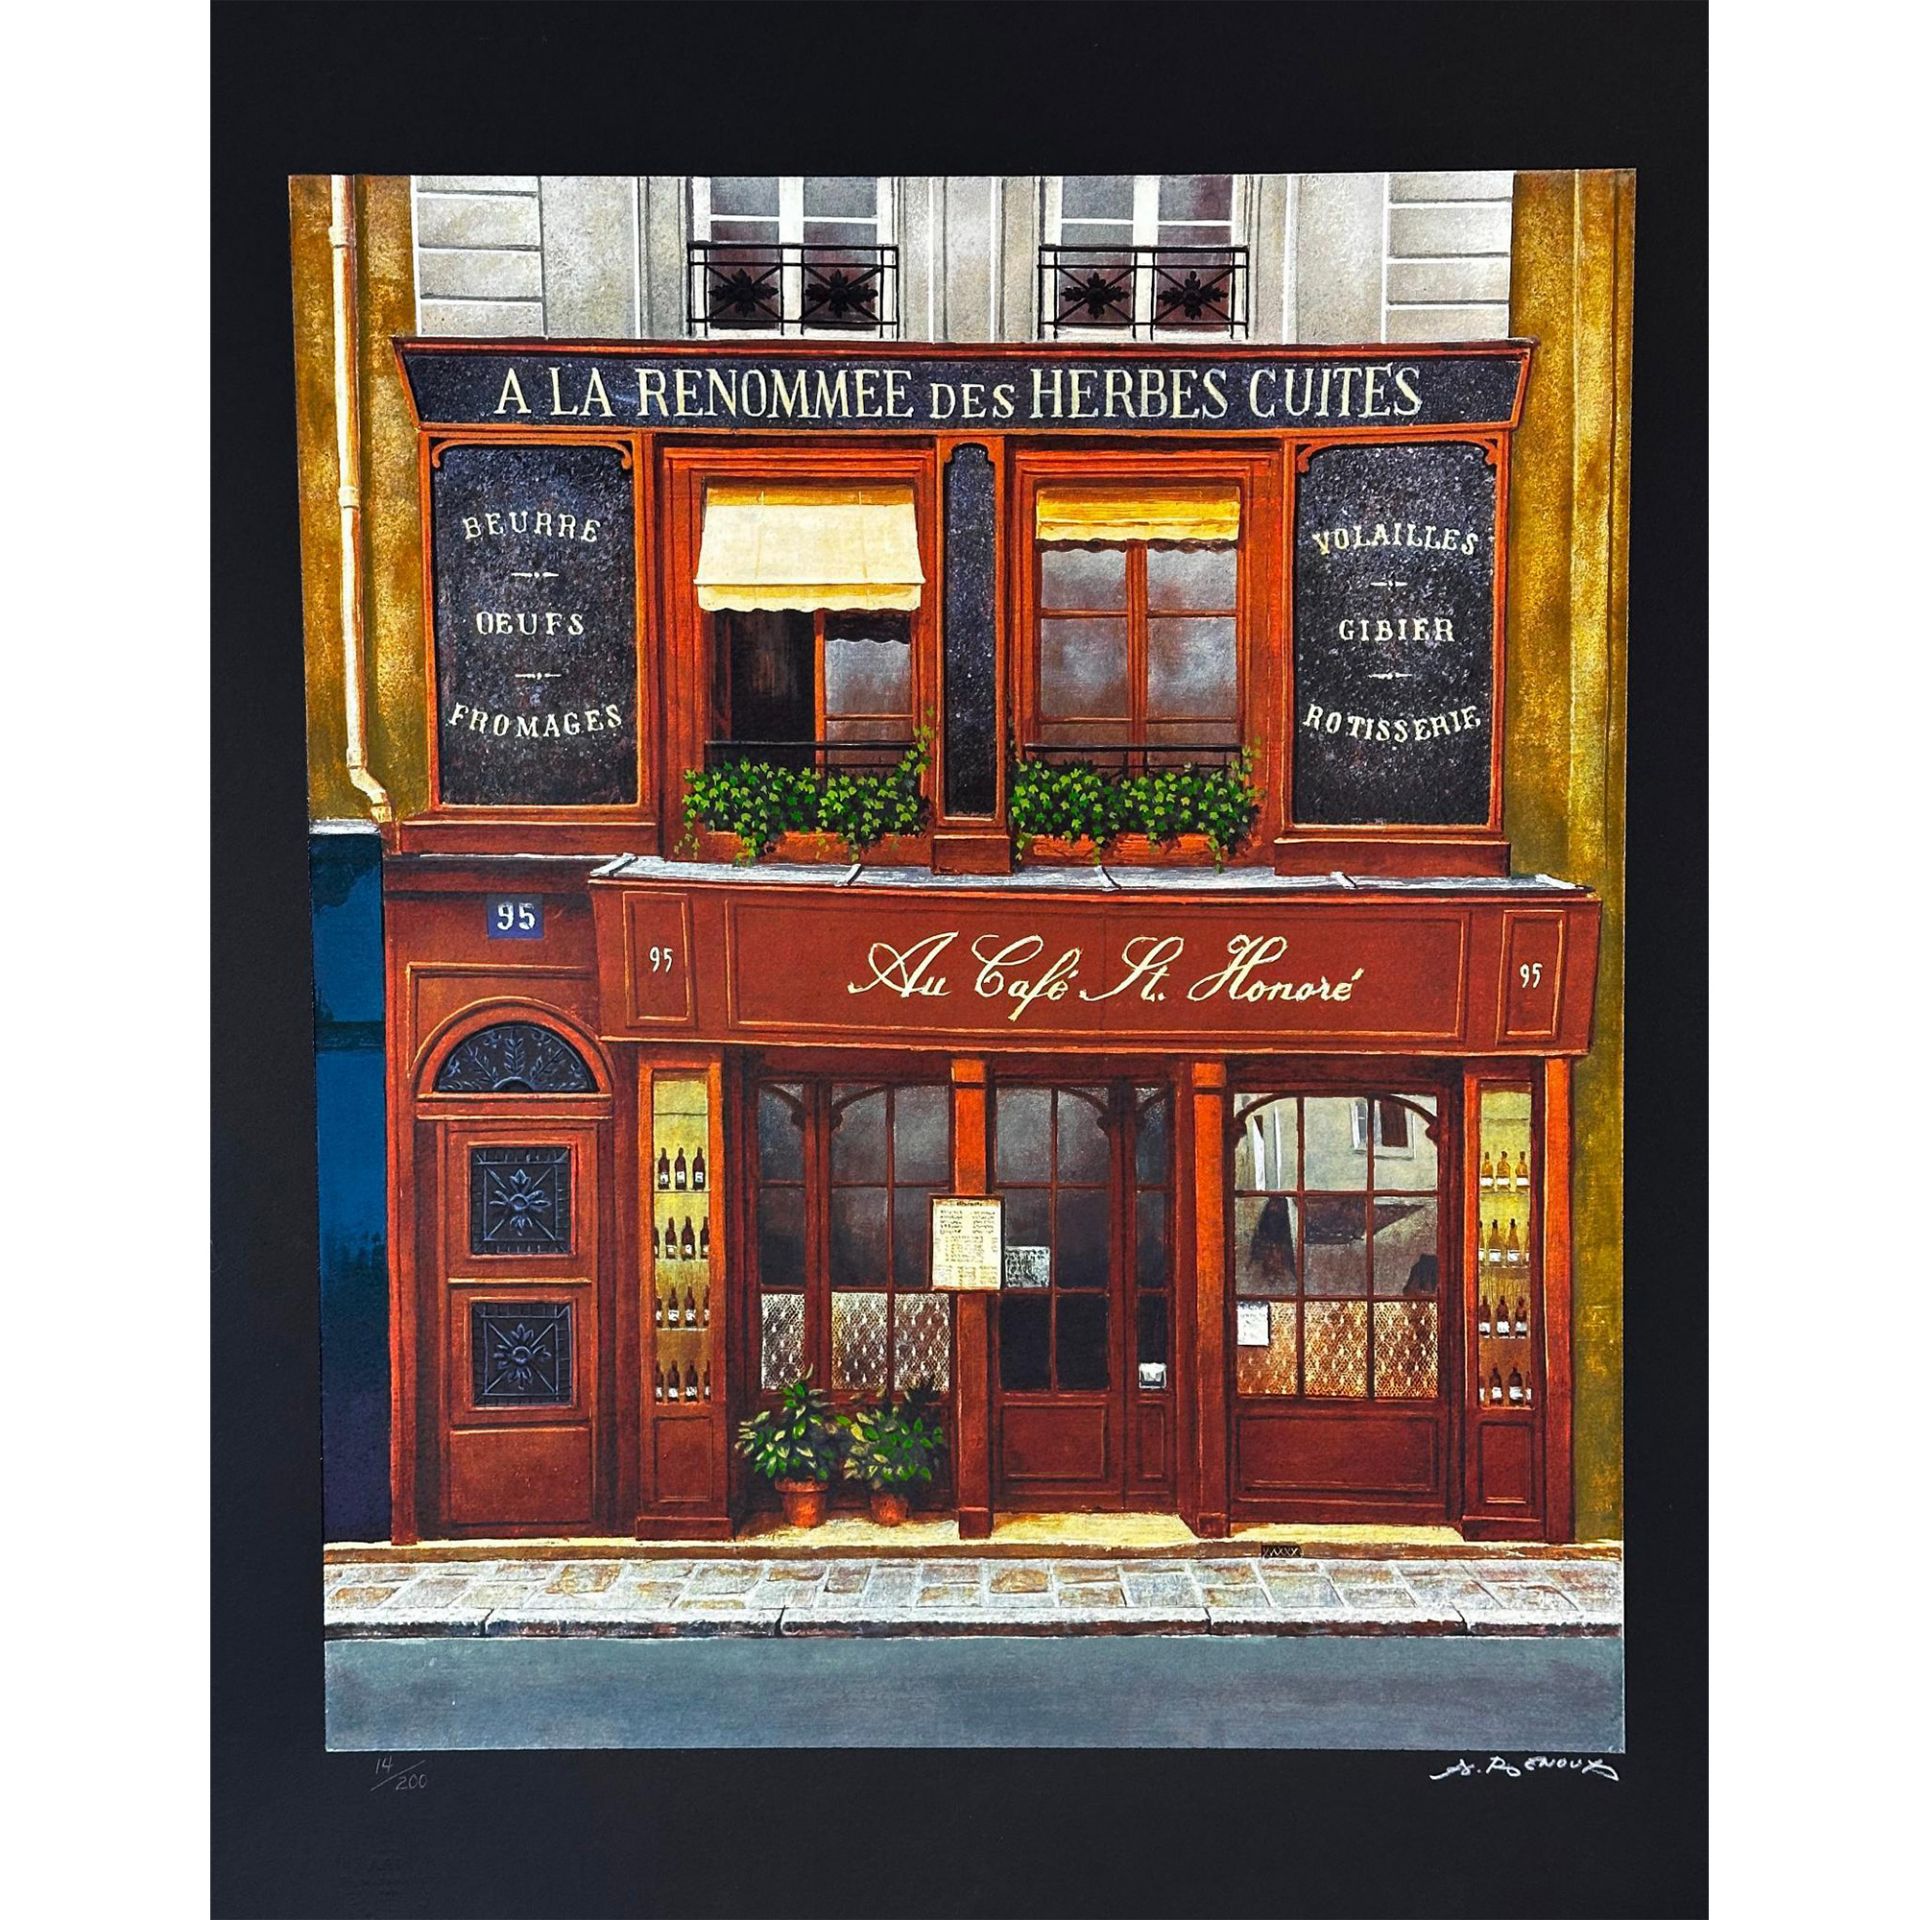 Andre Renoux (1939-2002), Serigraph, Cafe St. Honore, Signed